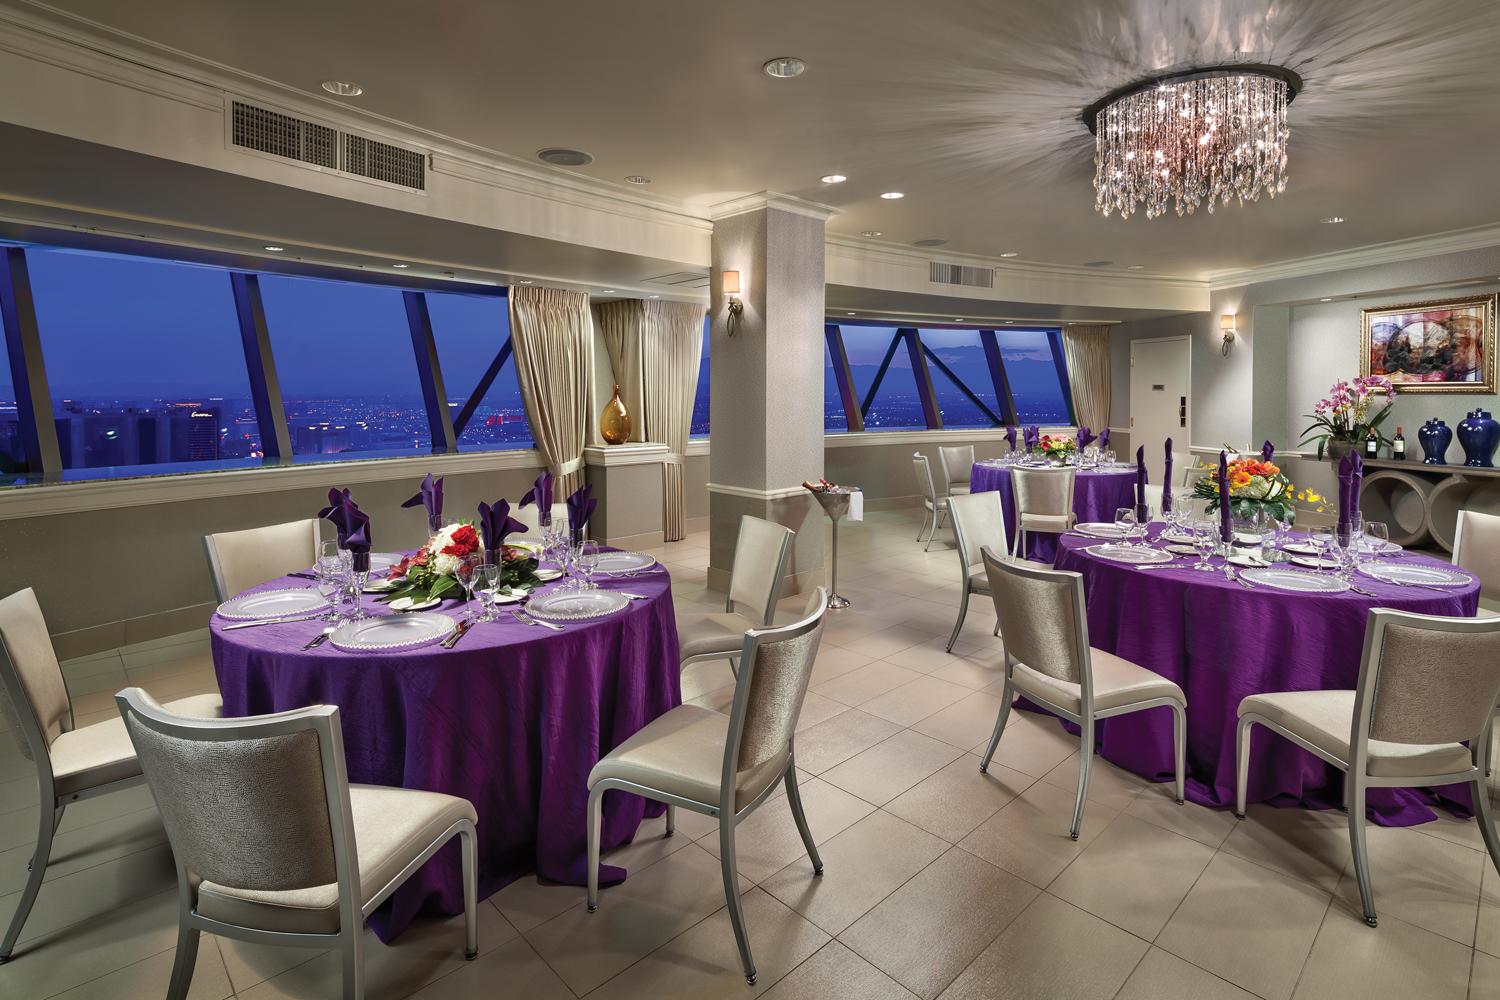 The STRAT Renaissance room in the SkyPod Tower with white tiles and a chandelier and tables with purple tablecloths set with dinnerware overlooking a view of the Las Vegas valley